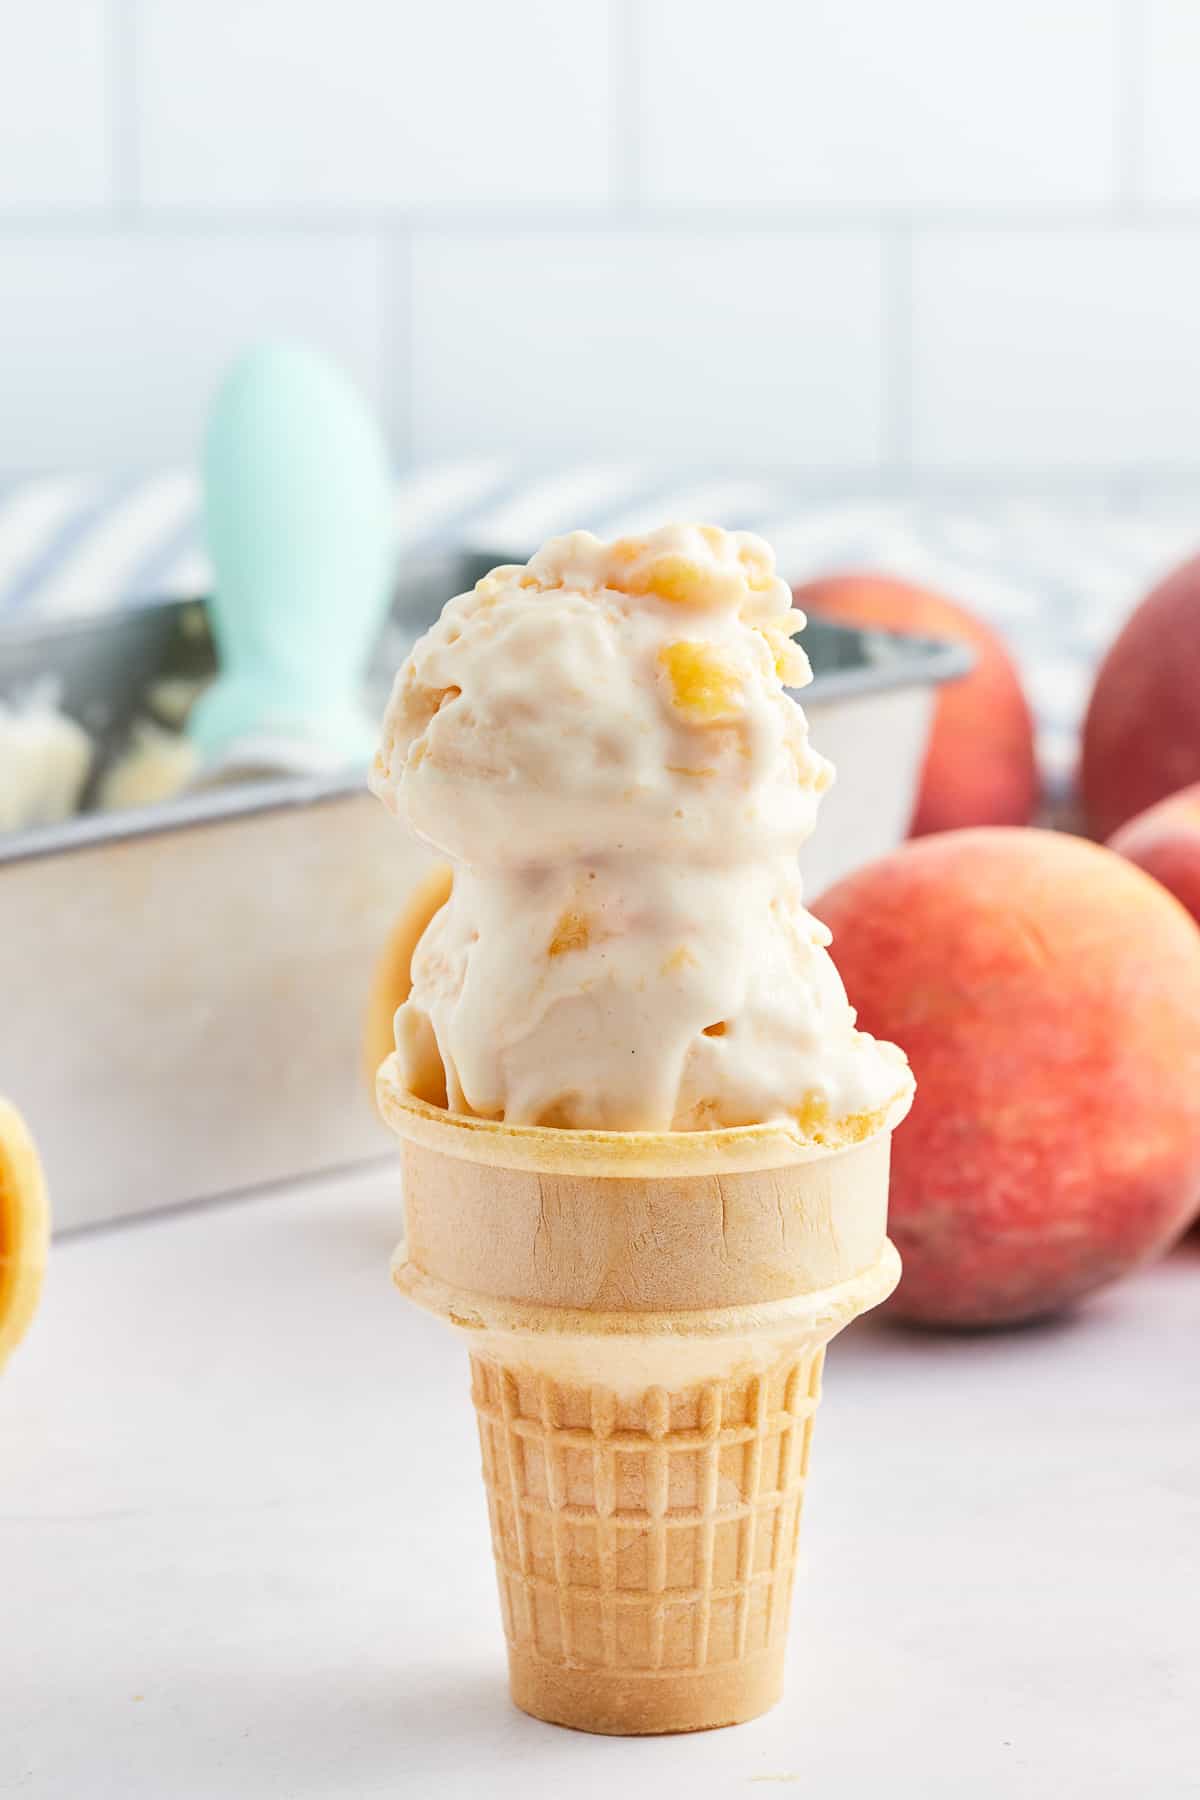 Two scoops of peach frozen yogurt on an ice cream cone in front of fresh peaches.